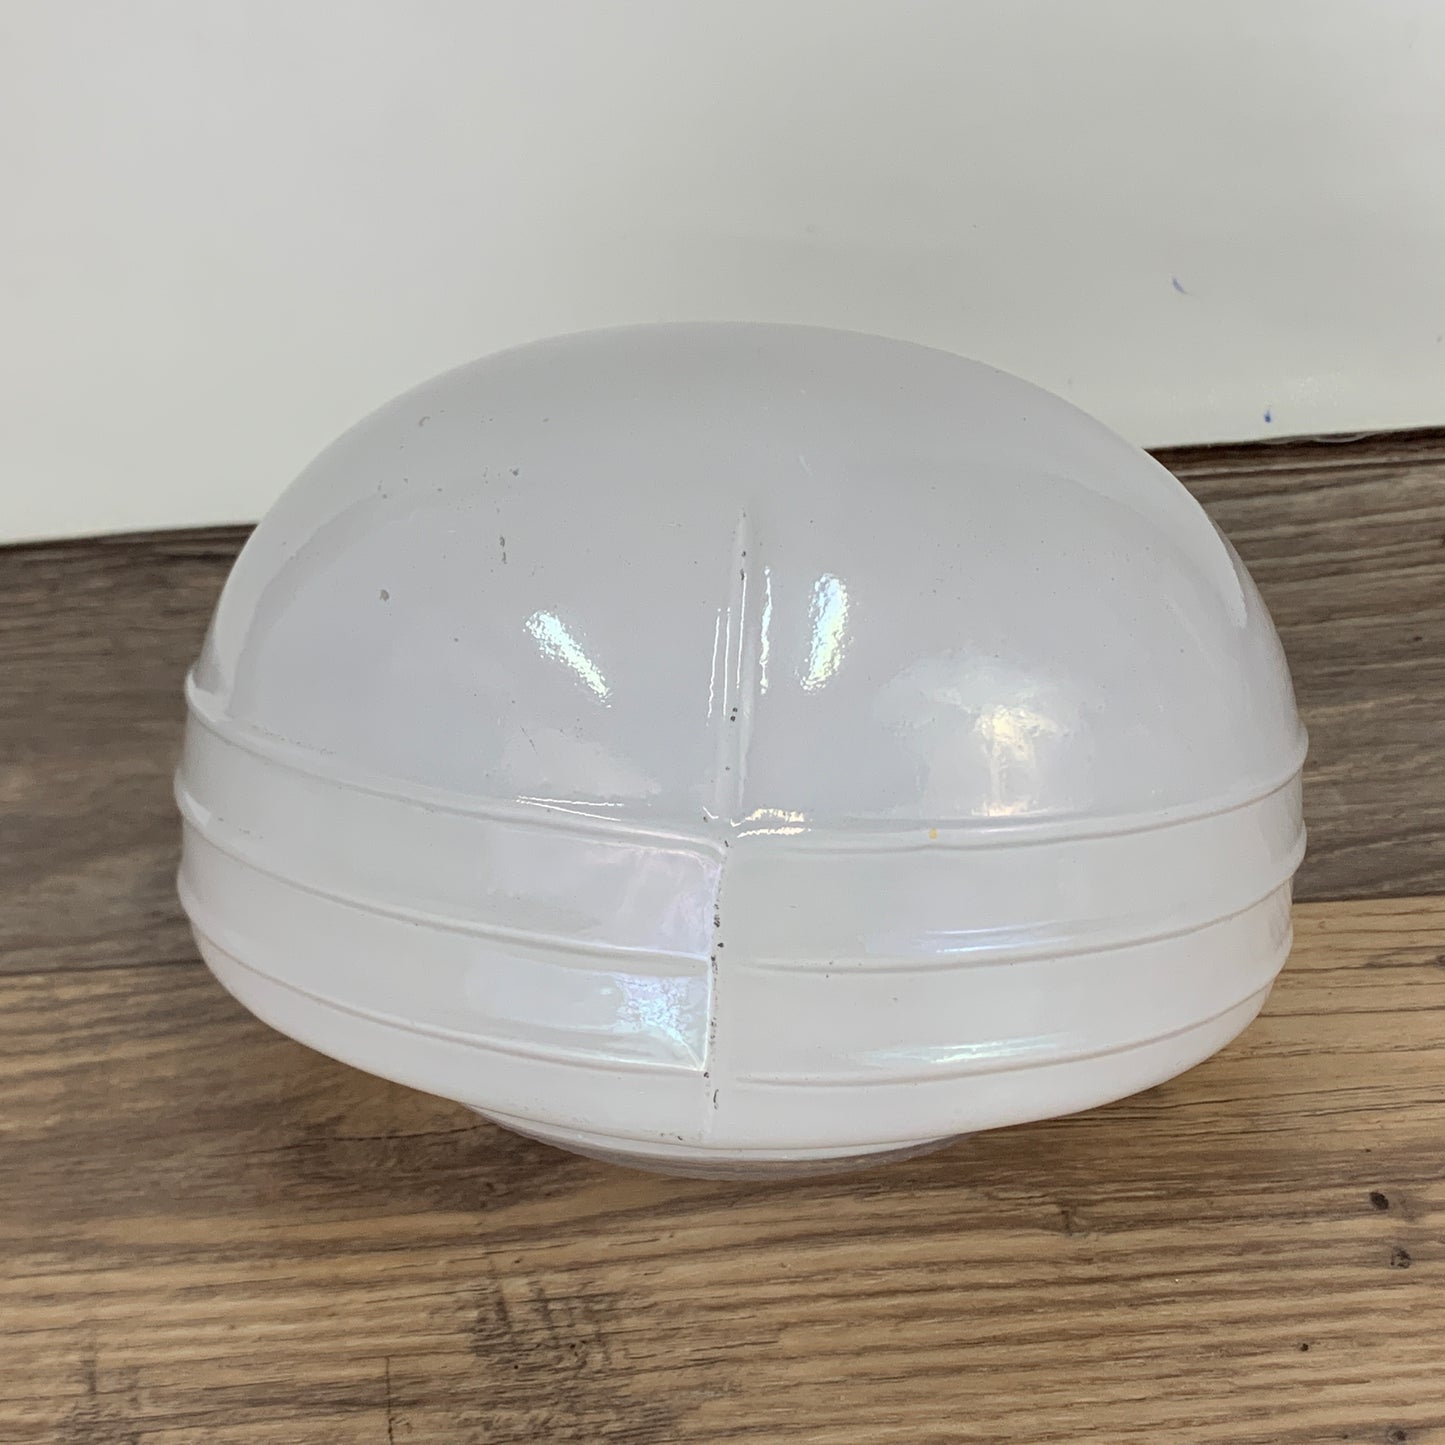 Vintage Porch Light Shade, Bathroom Light Cover, White and Clear Lamp Shade